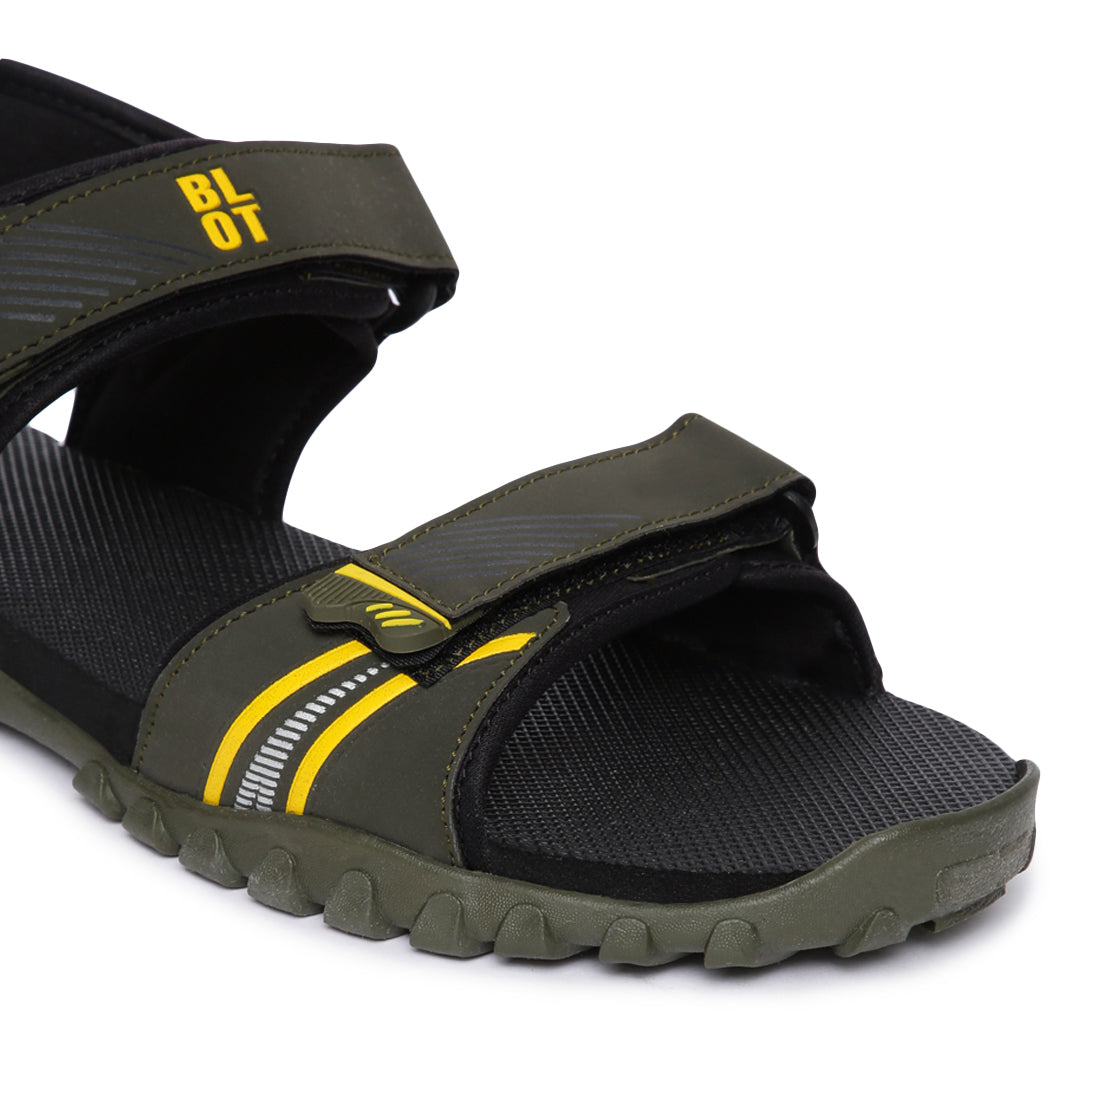 Paragon Blot K1408G Men Stylish Sandals | Comfortable Sandals for Daily Outdoor Use | Casual Formal Sandals with Cushioned Soles